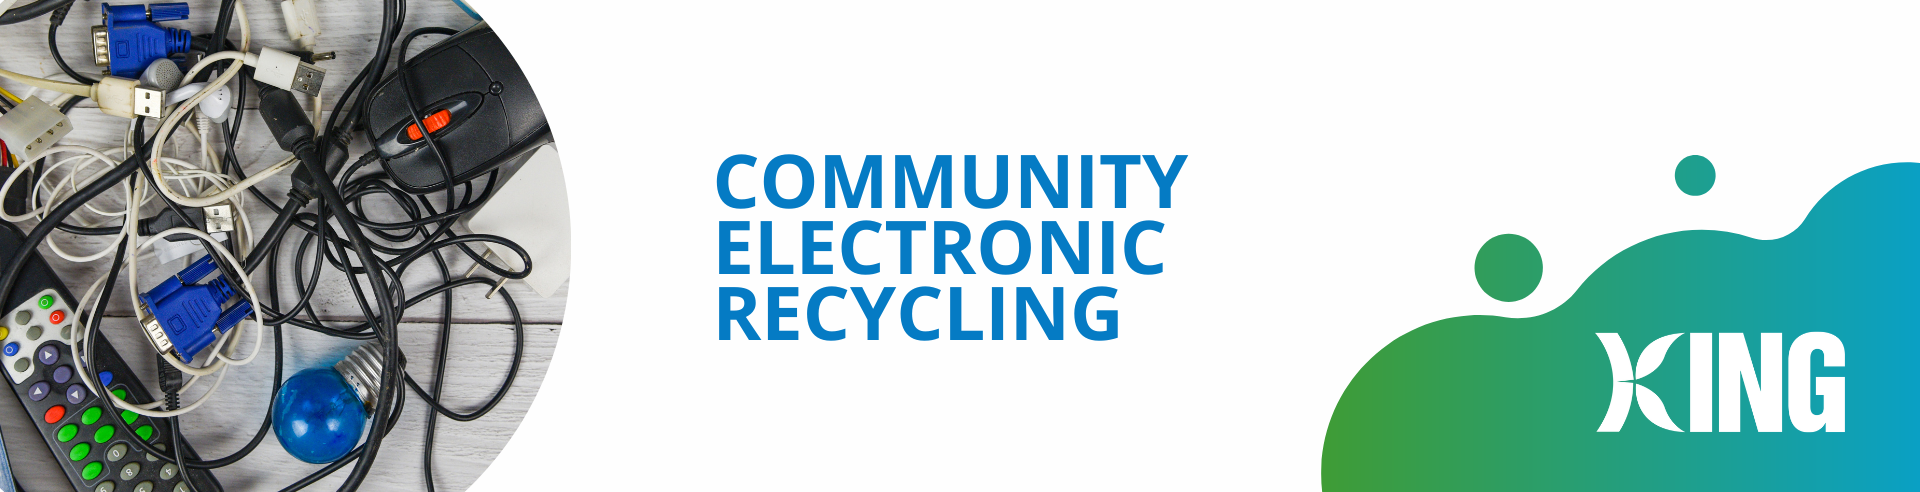 Community Electronic Recycling banner